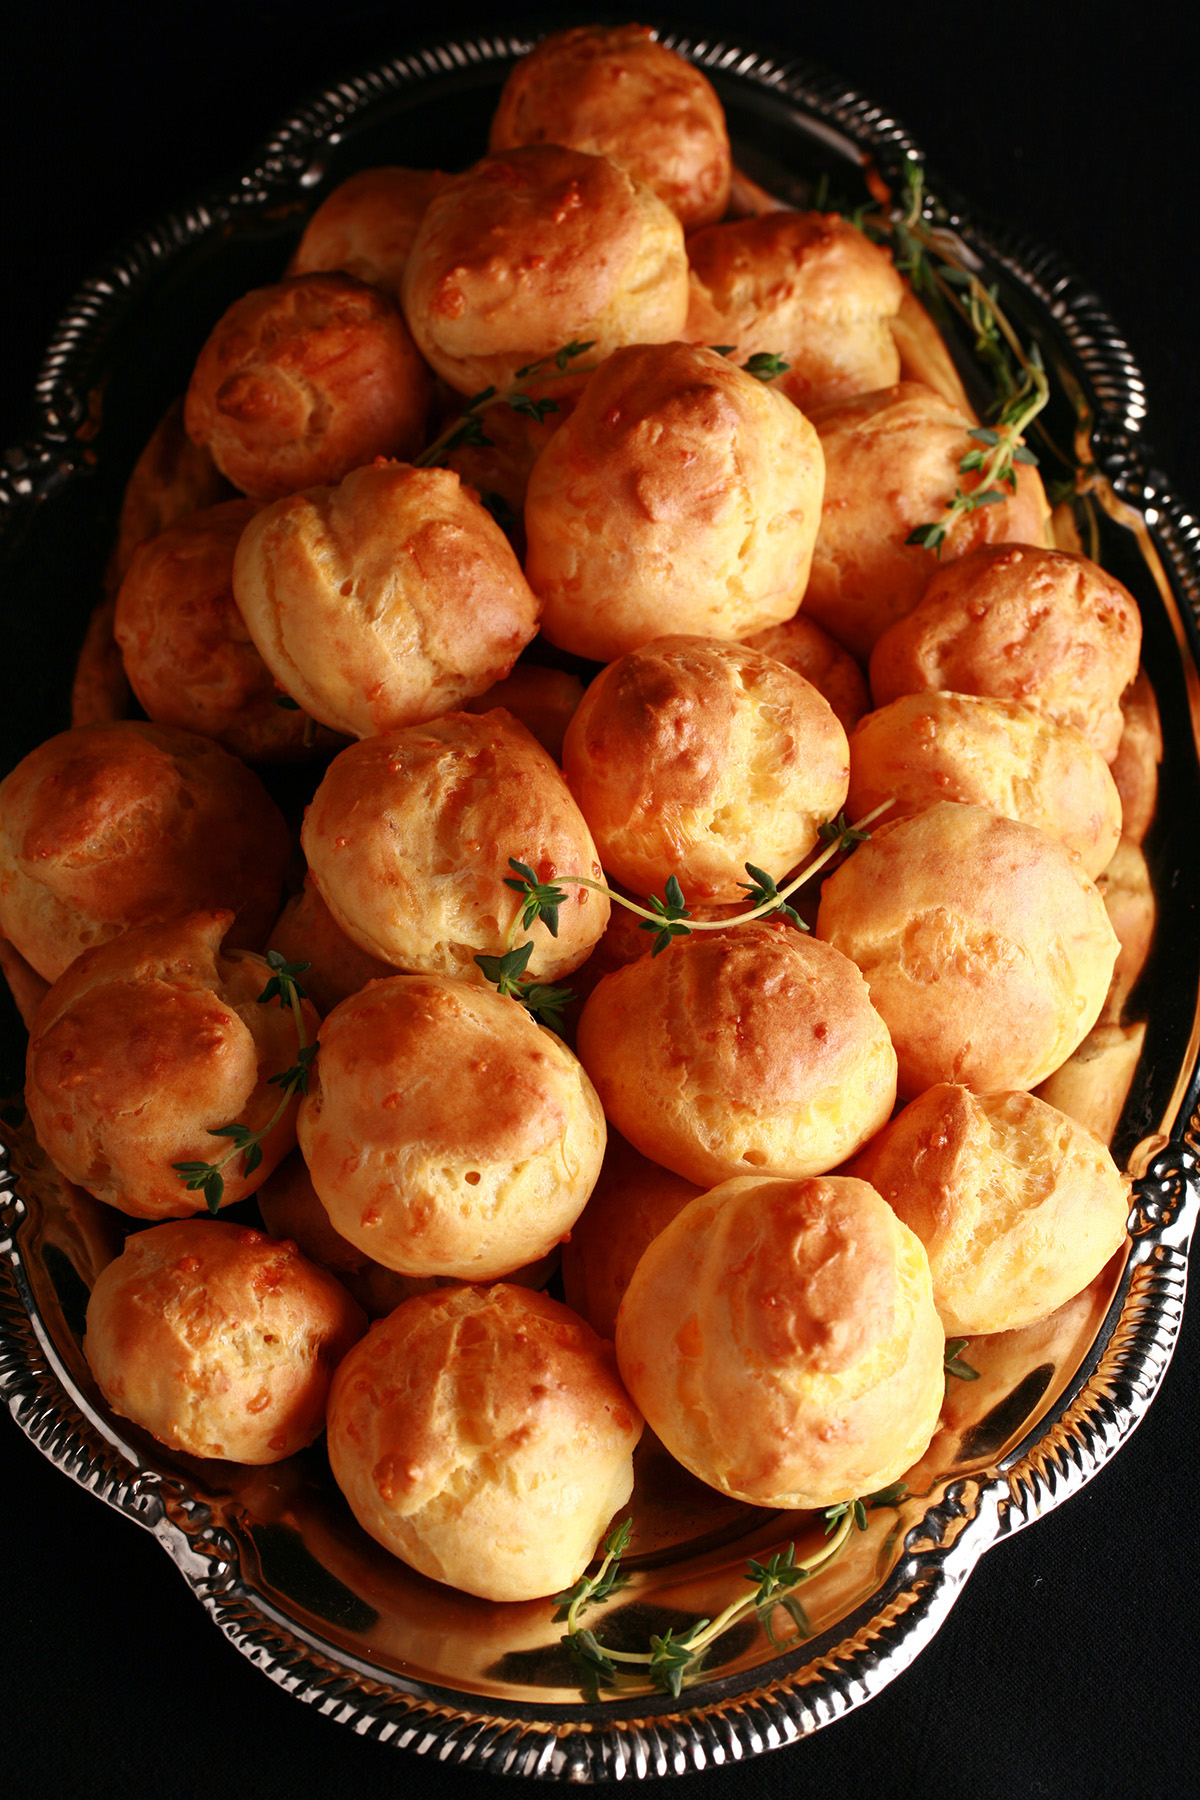 A large pile of Gluten-free Gougères - small, cheesy pastries - on a silver plate.